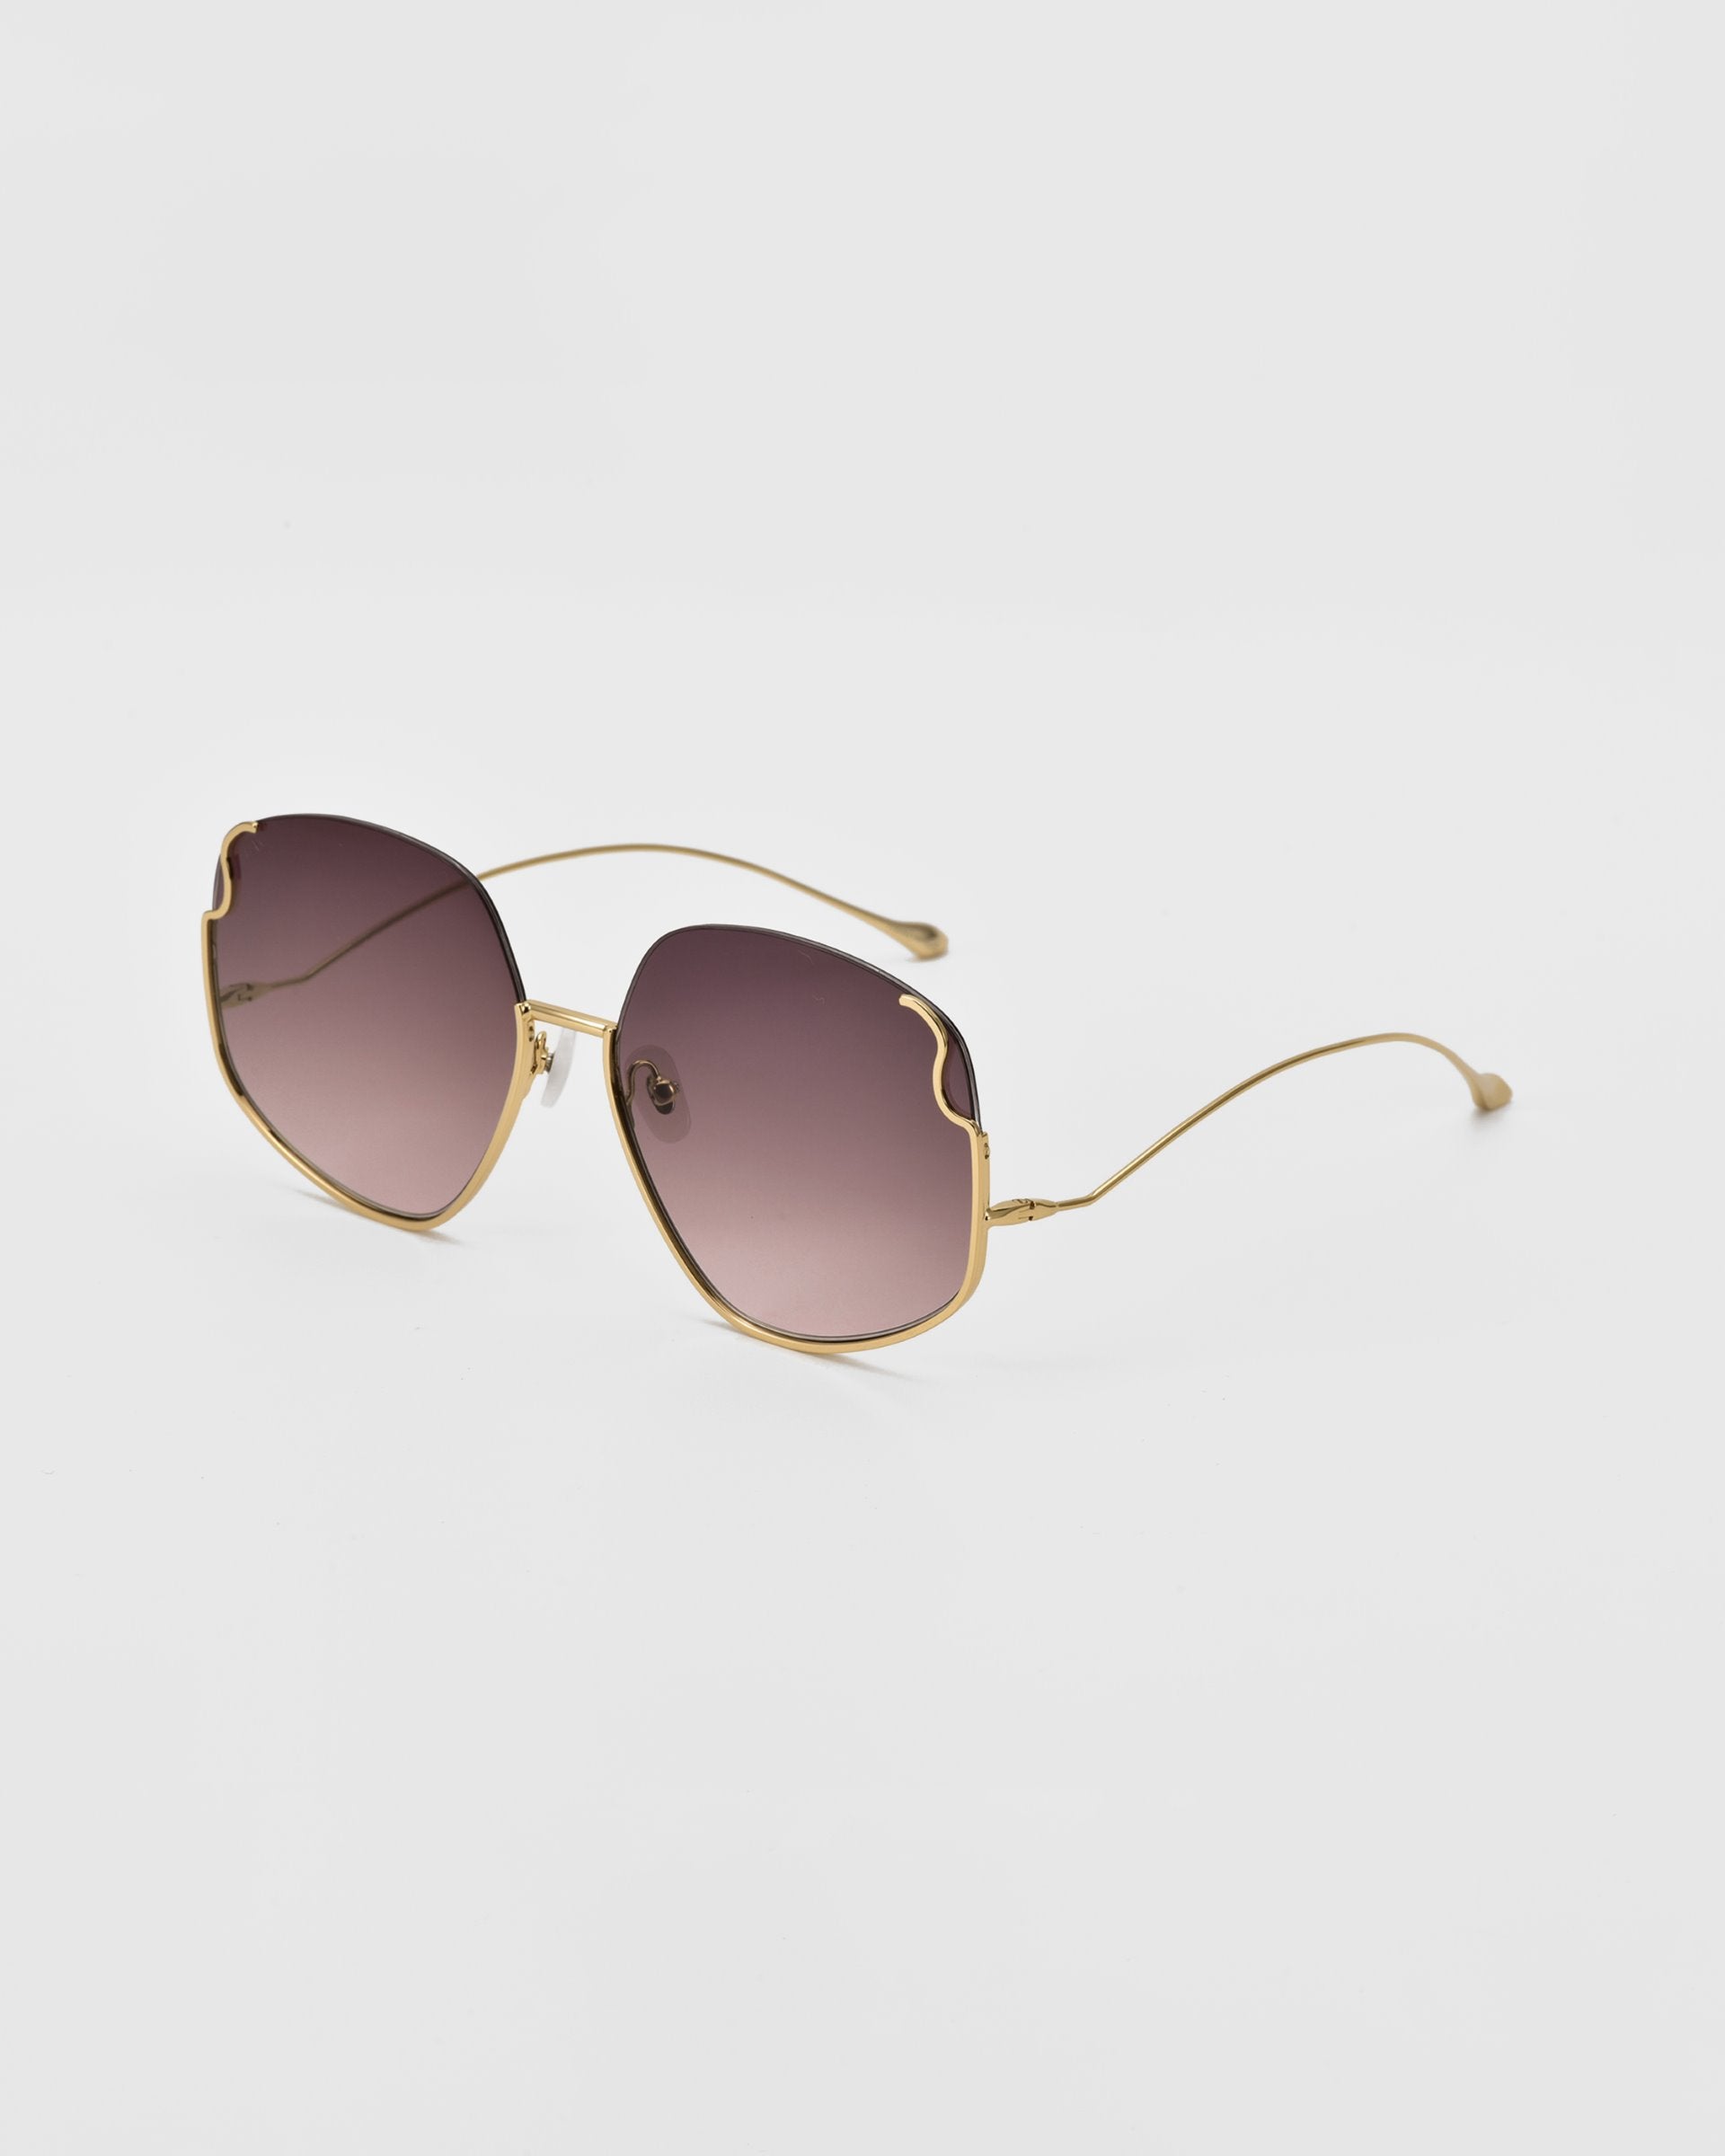 A pair of Drape sunglasses by For Art&#39;s Sake® with gold metal frames and gradient lenses. The oversized squared frame transitions from dark at the top to lighter at the bottom. These sunglasses feature a unique curved design on the upper corners of the lenses, complete with intricate metal detailing.